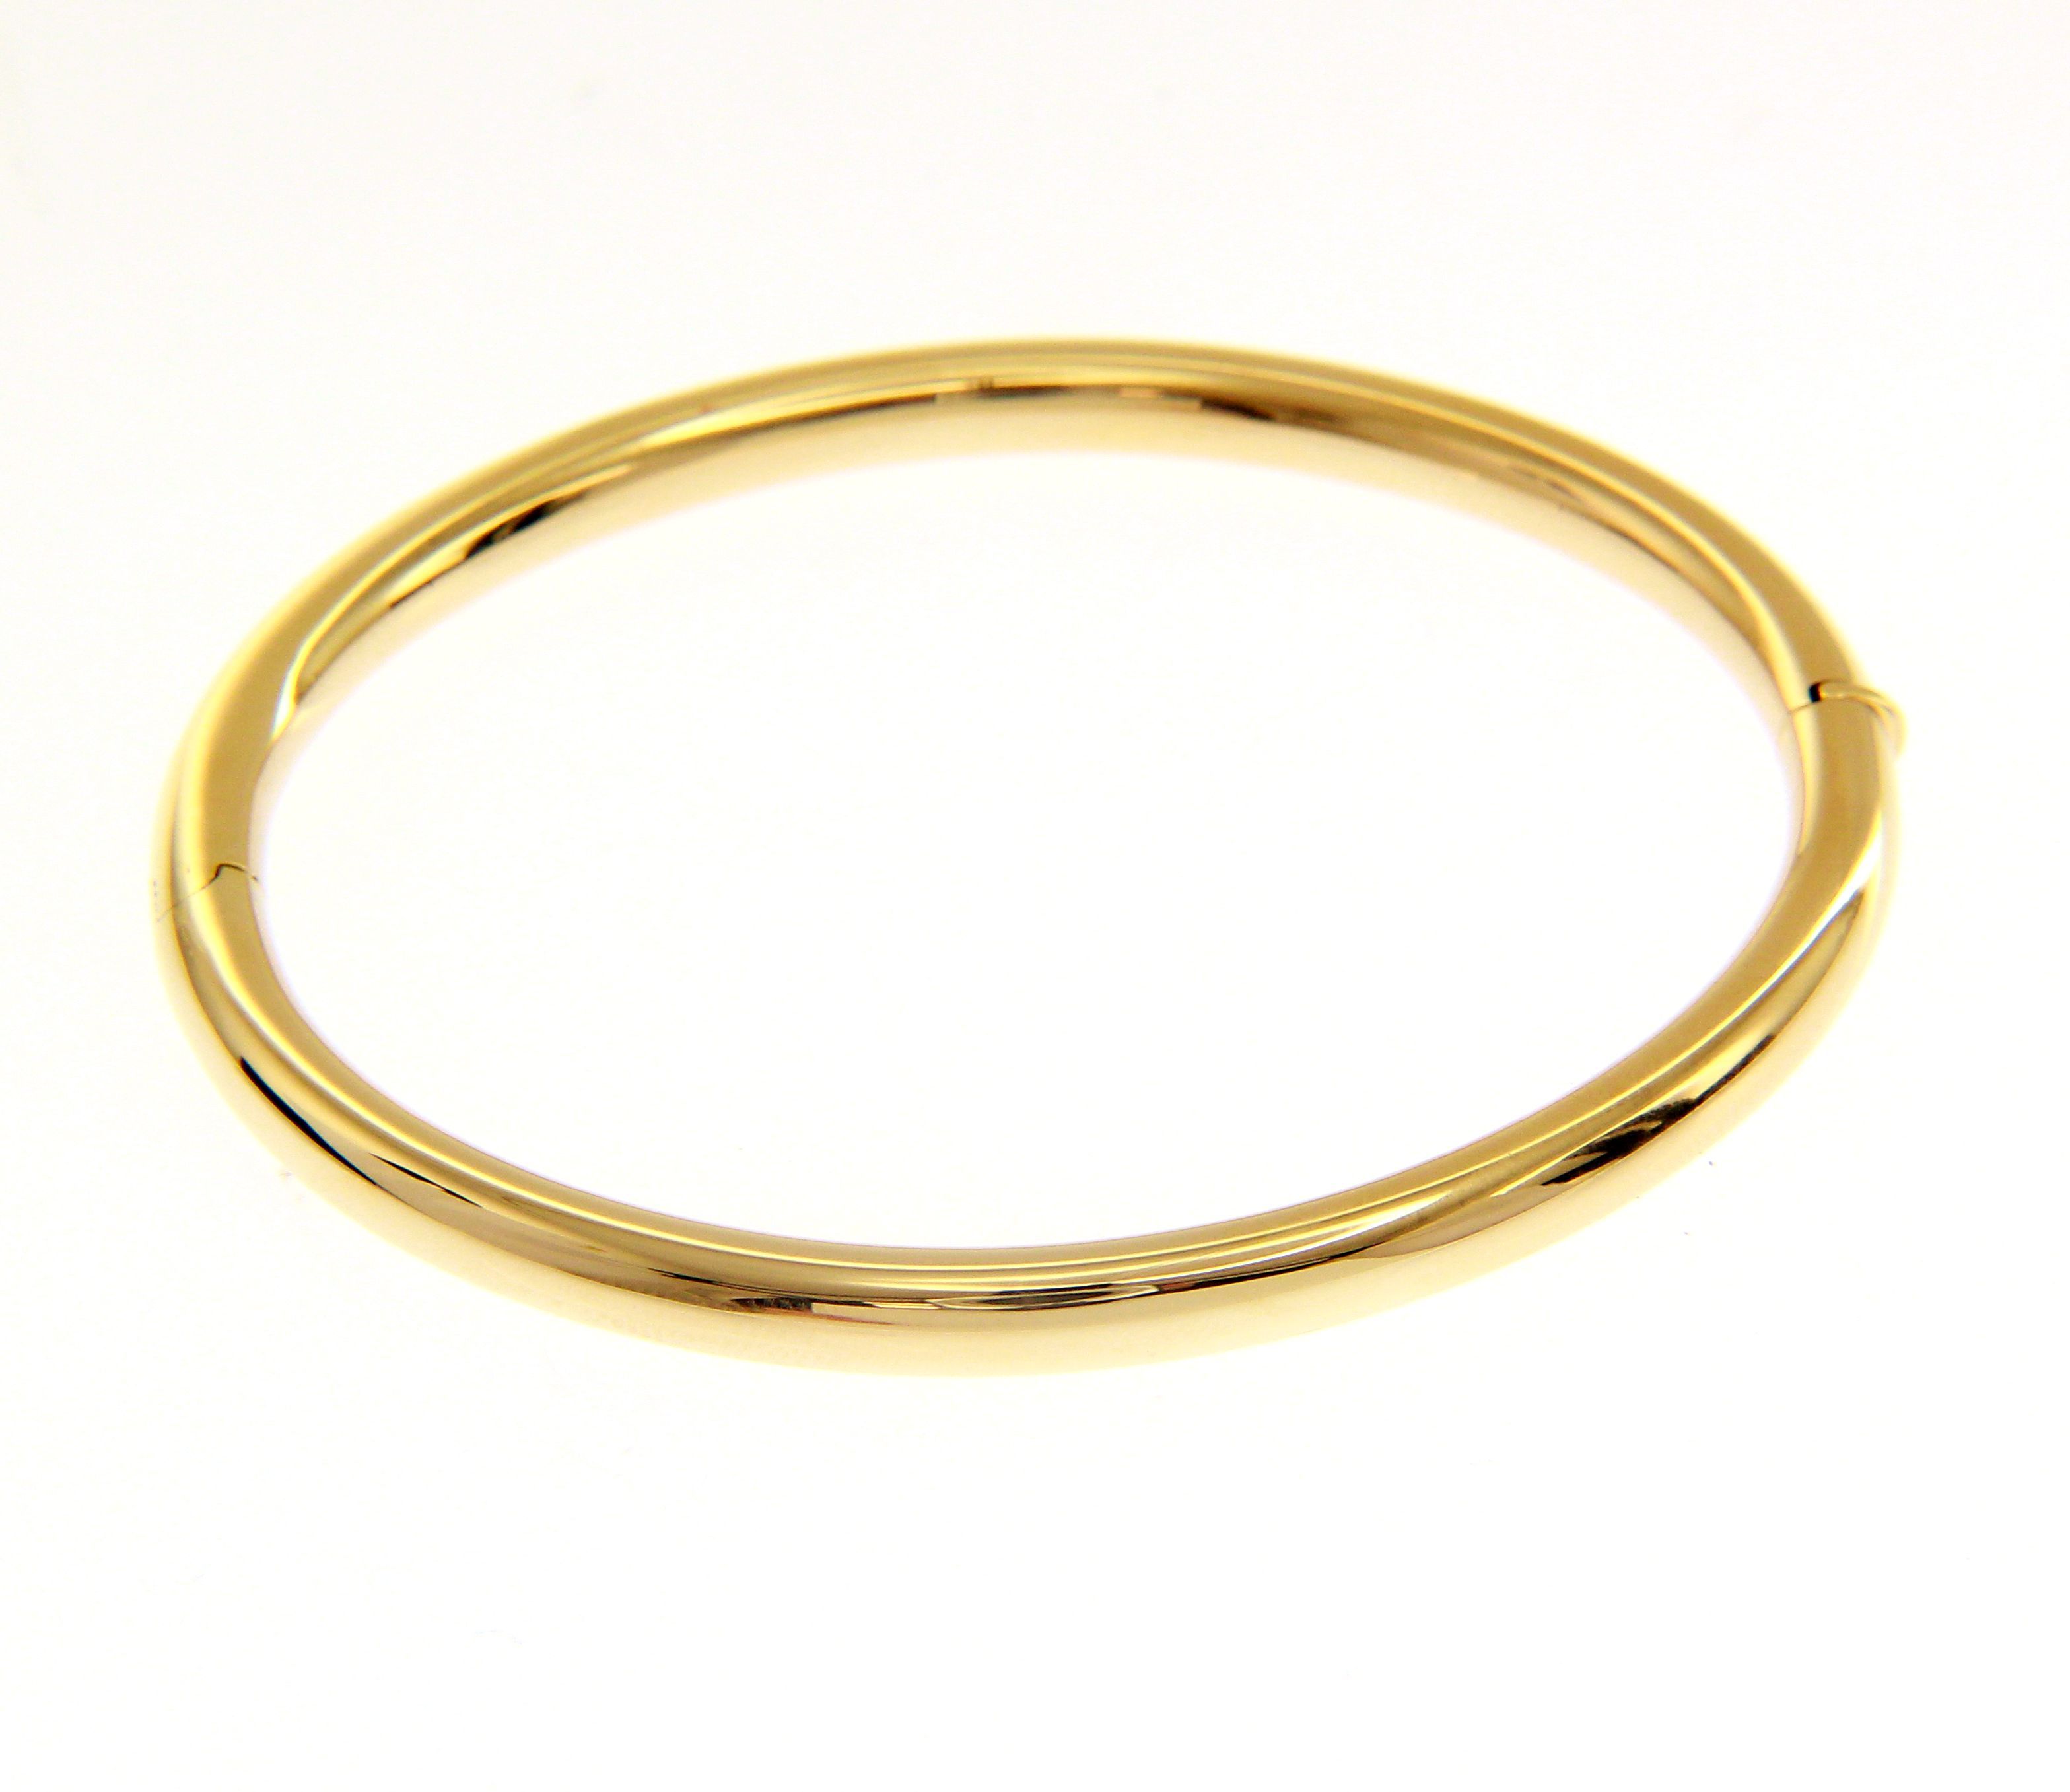 Golden oval bracelet with clasp k14 (code S205089)